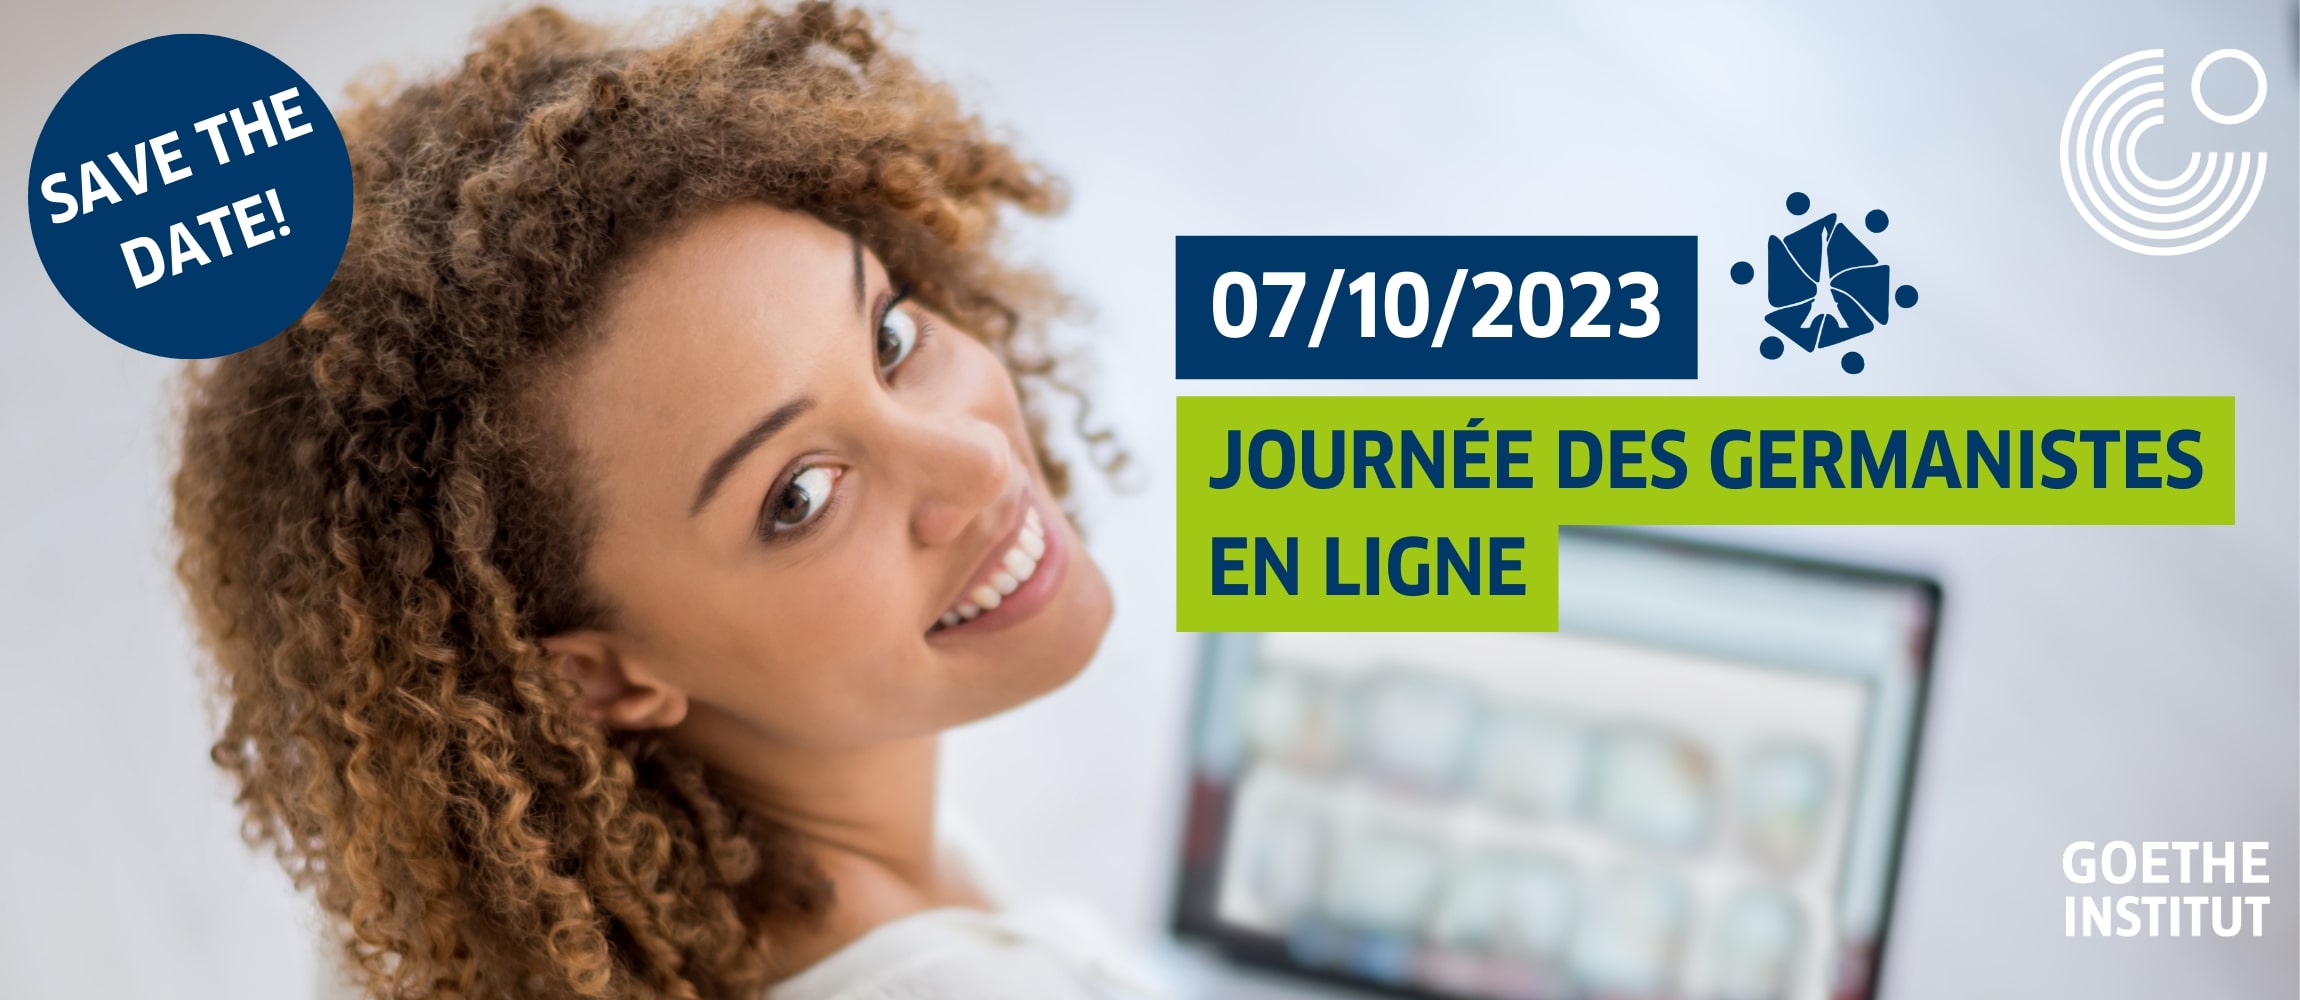 Save the Date DLT France